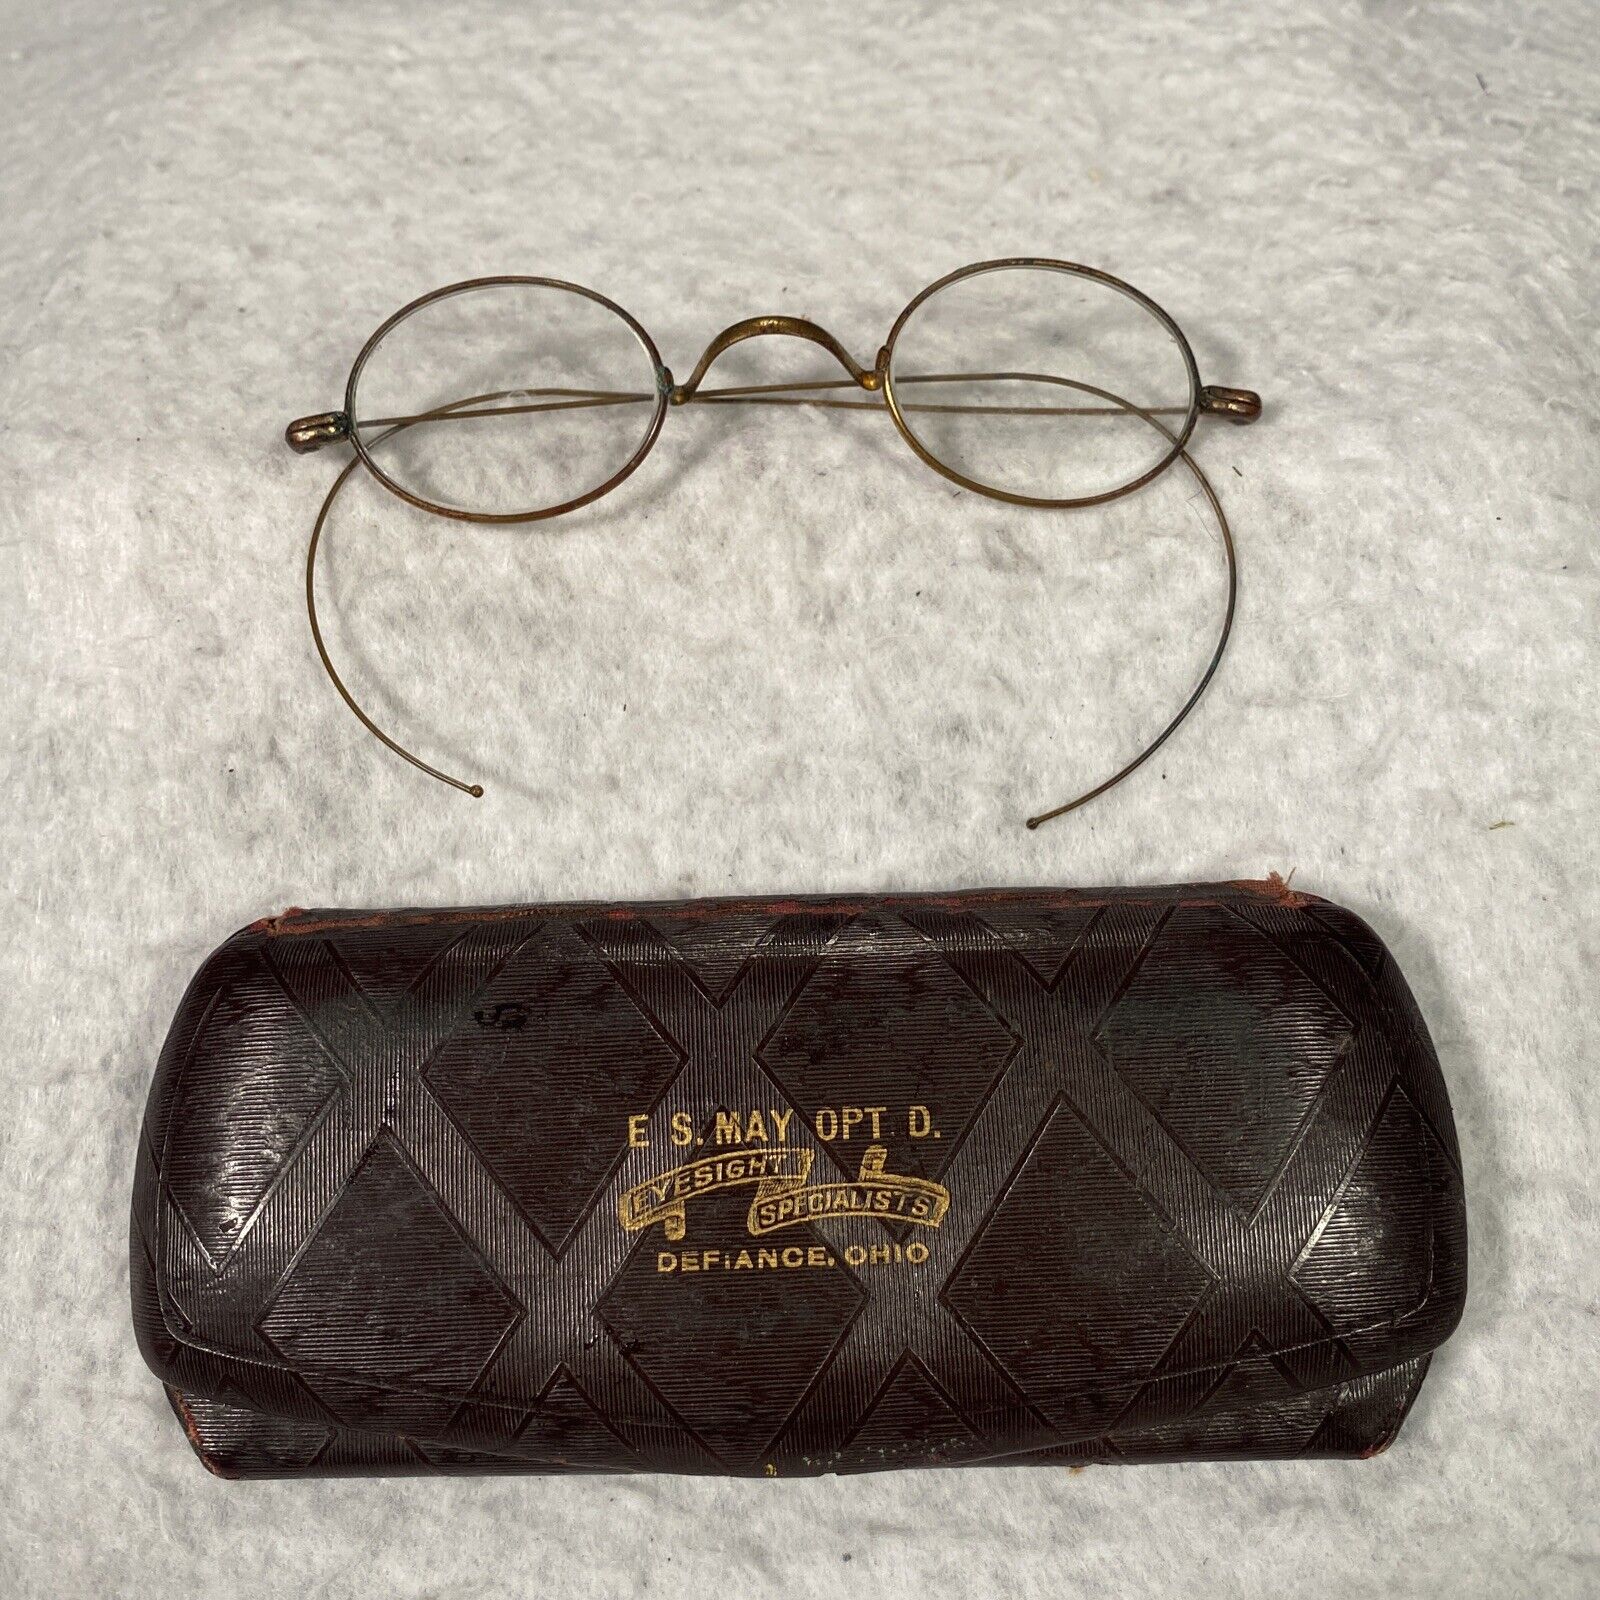 Vintage Small Oval Eyeglasses, Antique Vintage Eyeglasses Spectacles, With Case